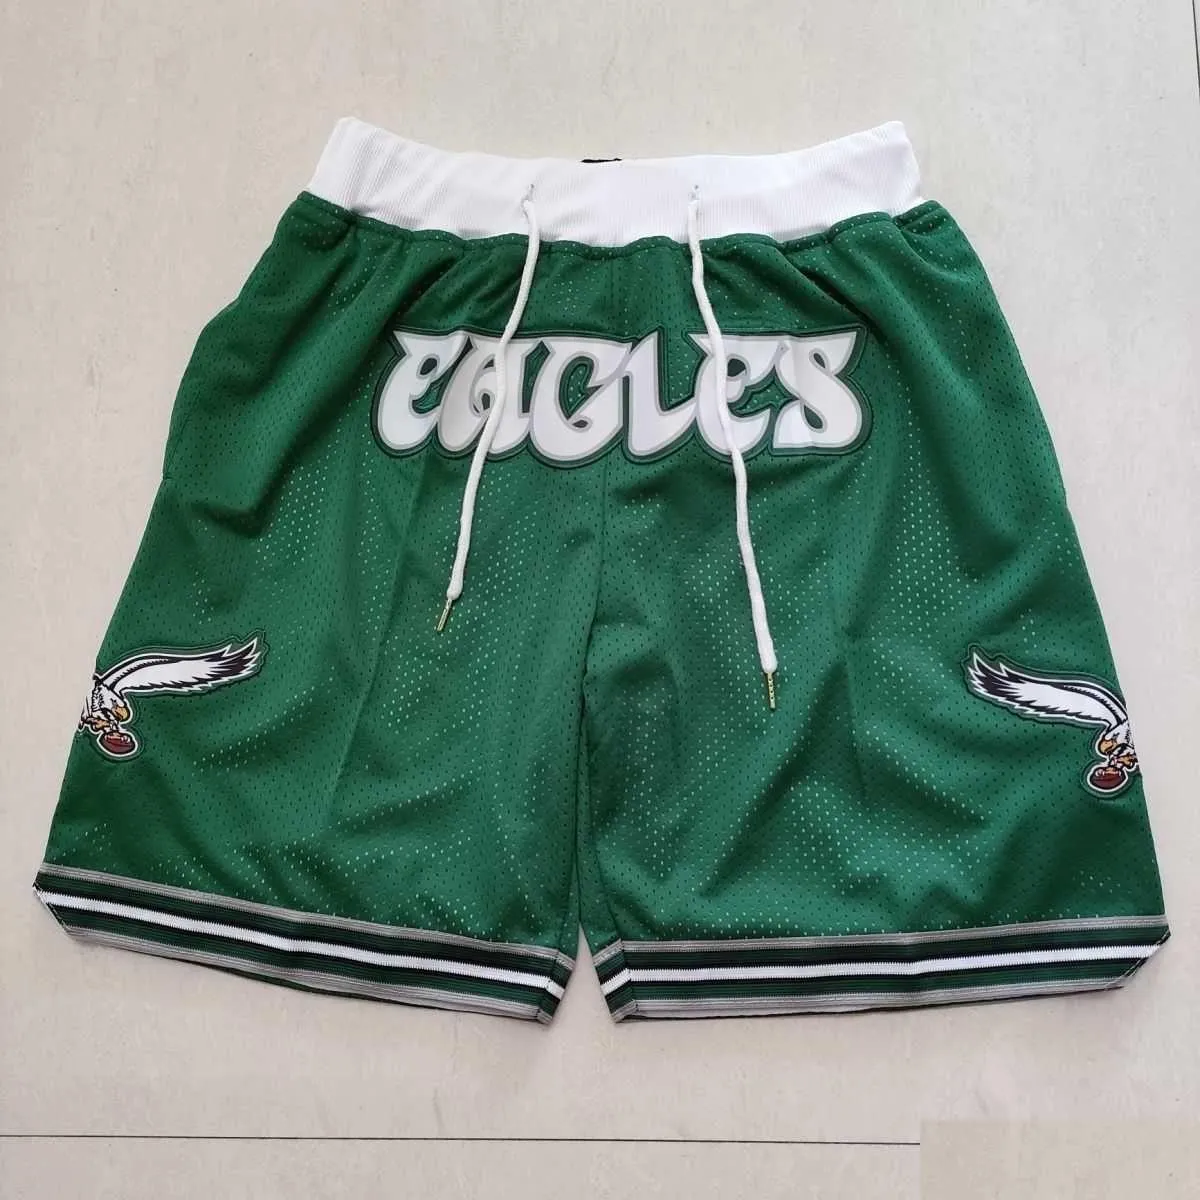 mens pants eagles embroidered pocket soccer shorts high street american hip hop basketball student training loose and relaxed